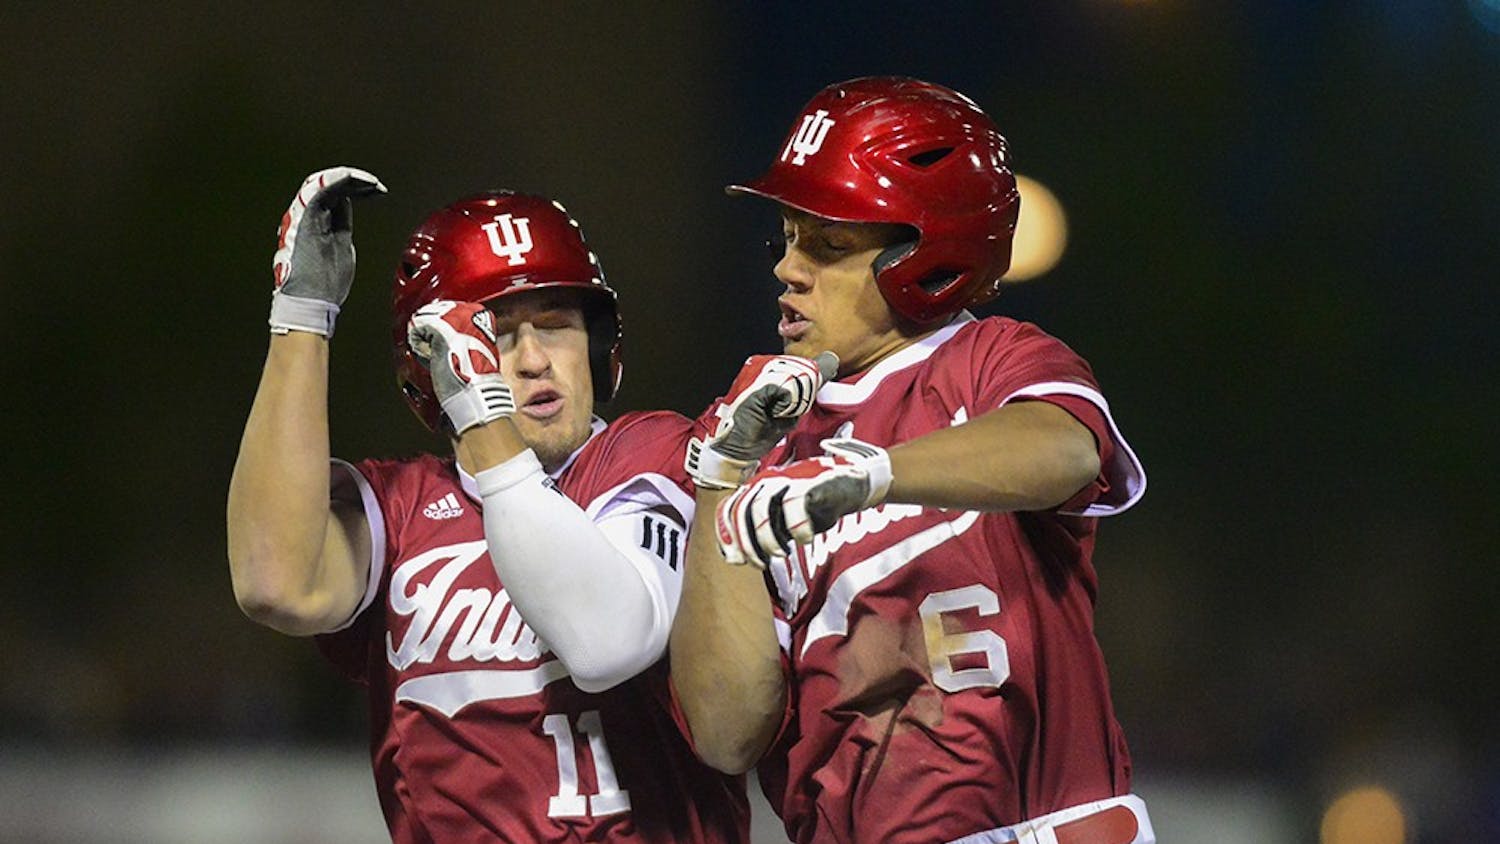 Senior Will Nolden celebrates with freshman Isaiah Pasteur after the Hoosiers beat Notre Dame on Tuesday at Victory Field in Indianapolis. Pasteur's hit allowed Nolden to score from second base, resulting in a walk-off.